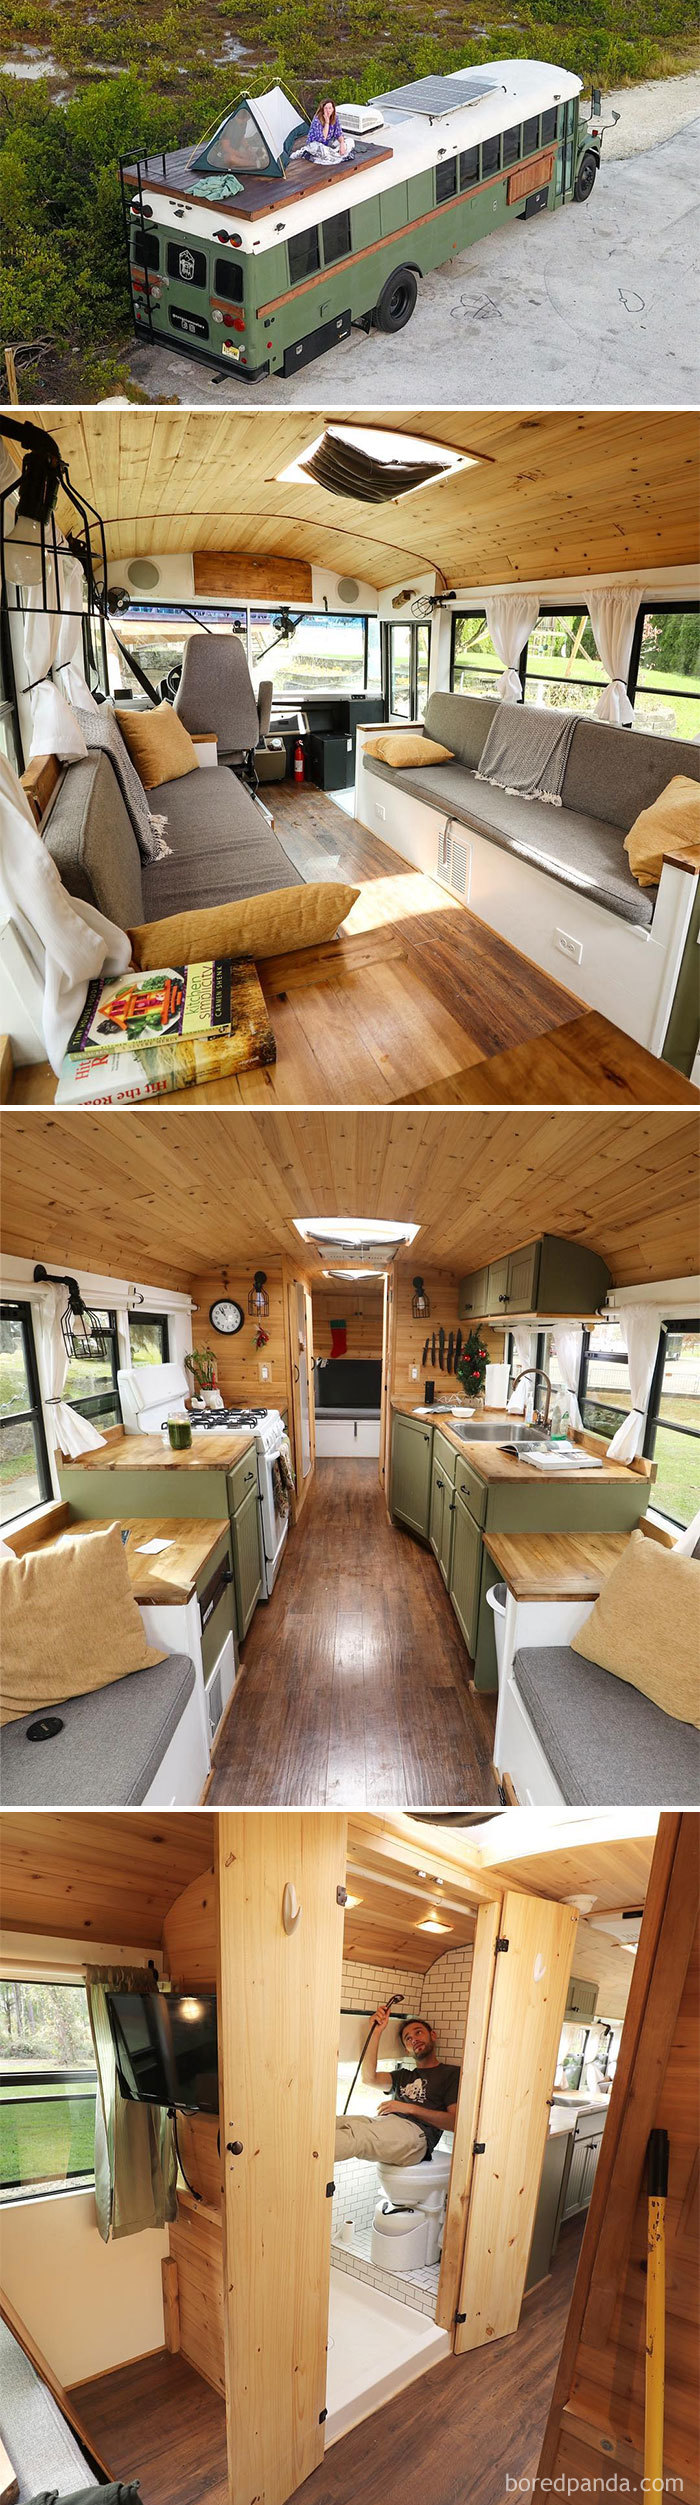 30 Of The Most Epic Bus And Van Conversions Bored Panda,How Wide Is A Queen Size Bed In Inches